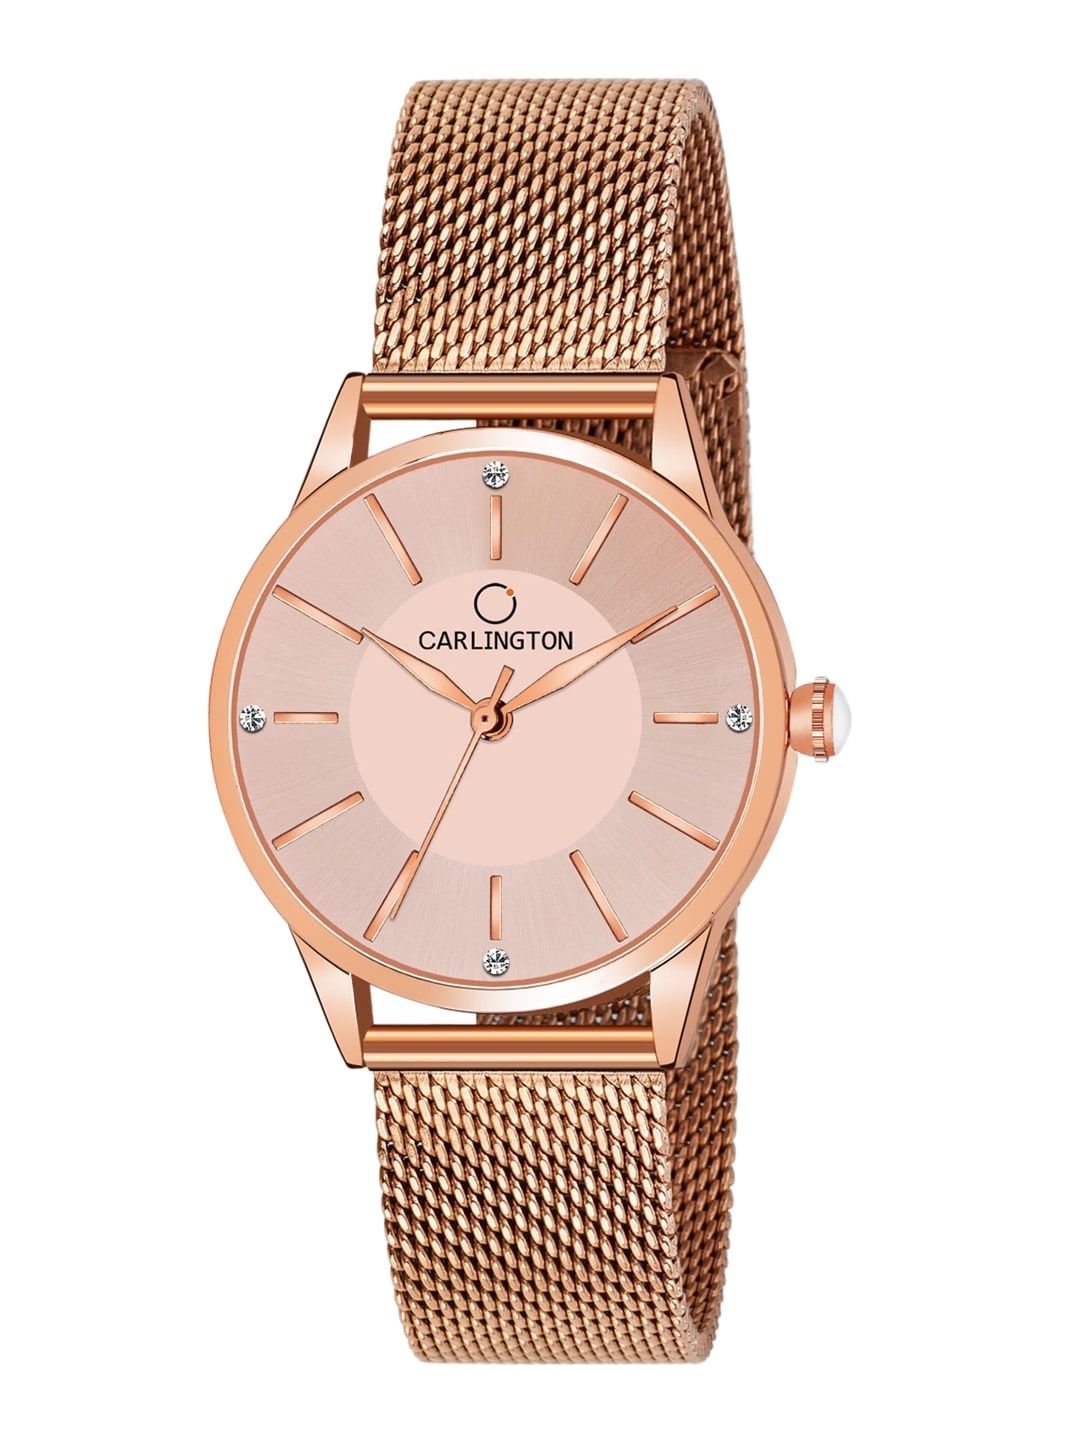 CARLINGTON Women Rose Gold-Toned Embellished Dial & Rose Gold-Toned Straps Watch CT2004 Price in India